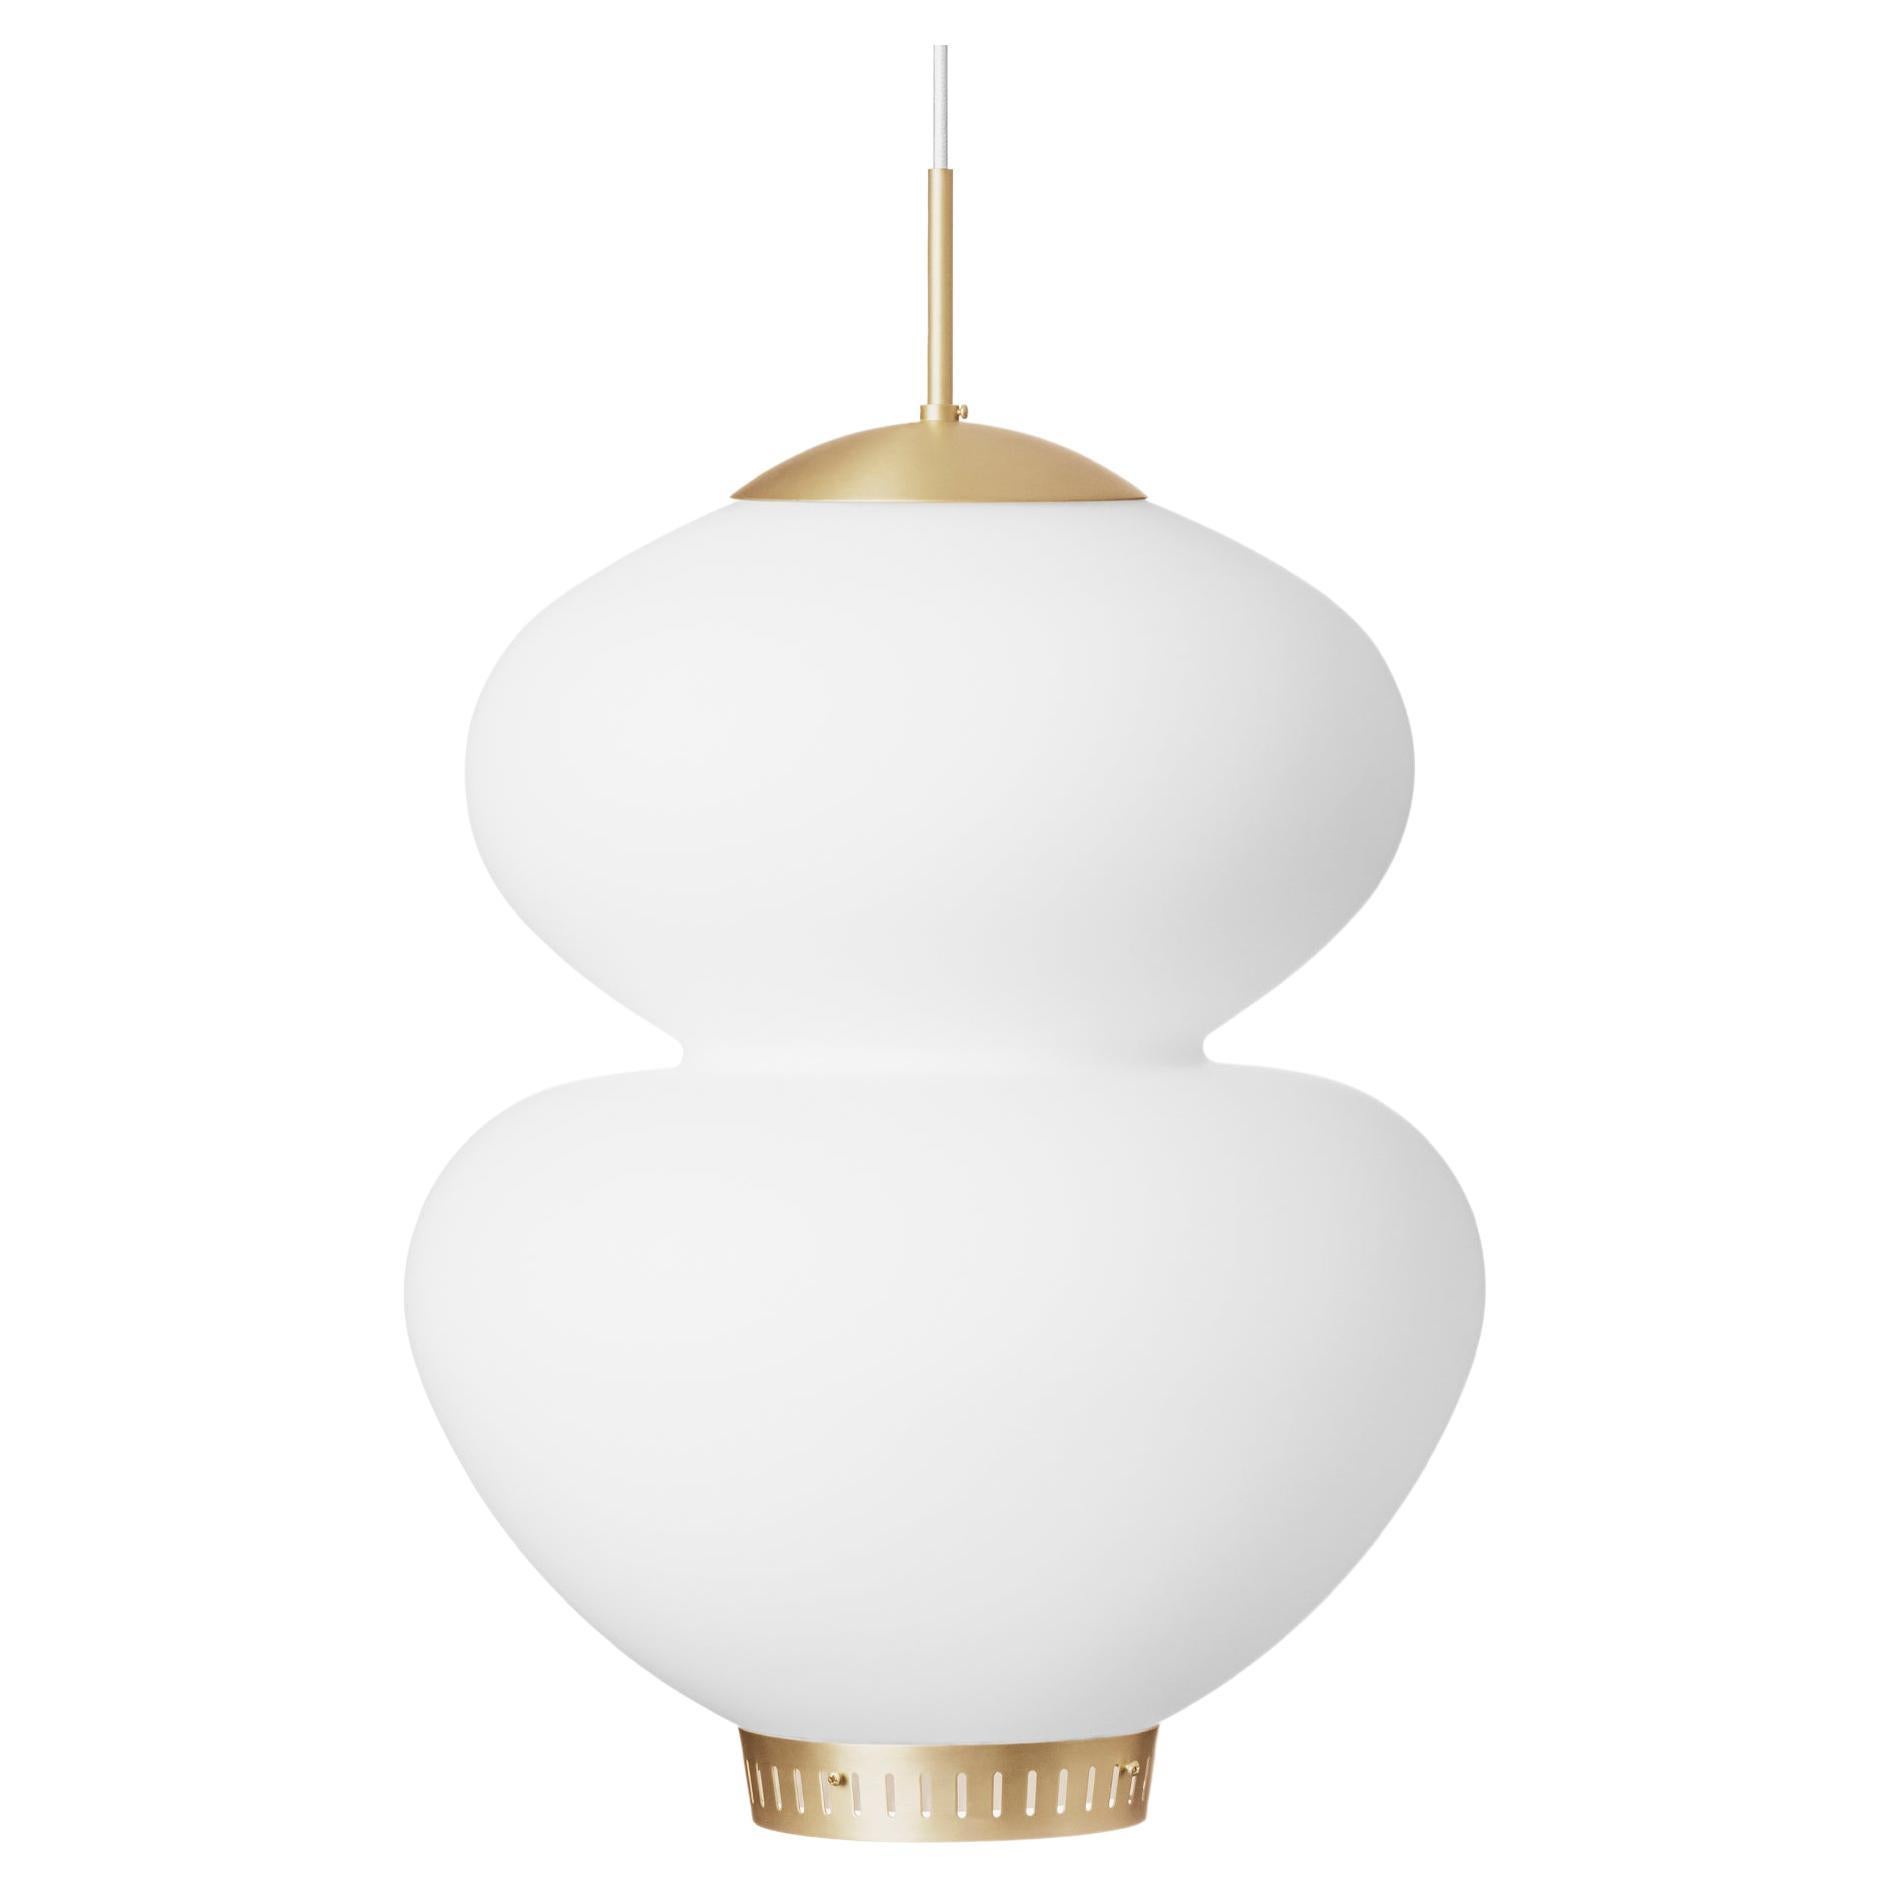 'Peanut 400' Pendant Lamp by Bent Karlby for Lyfa 'New Edition'